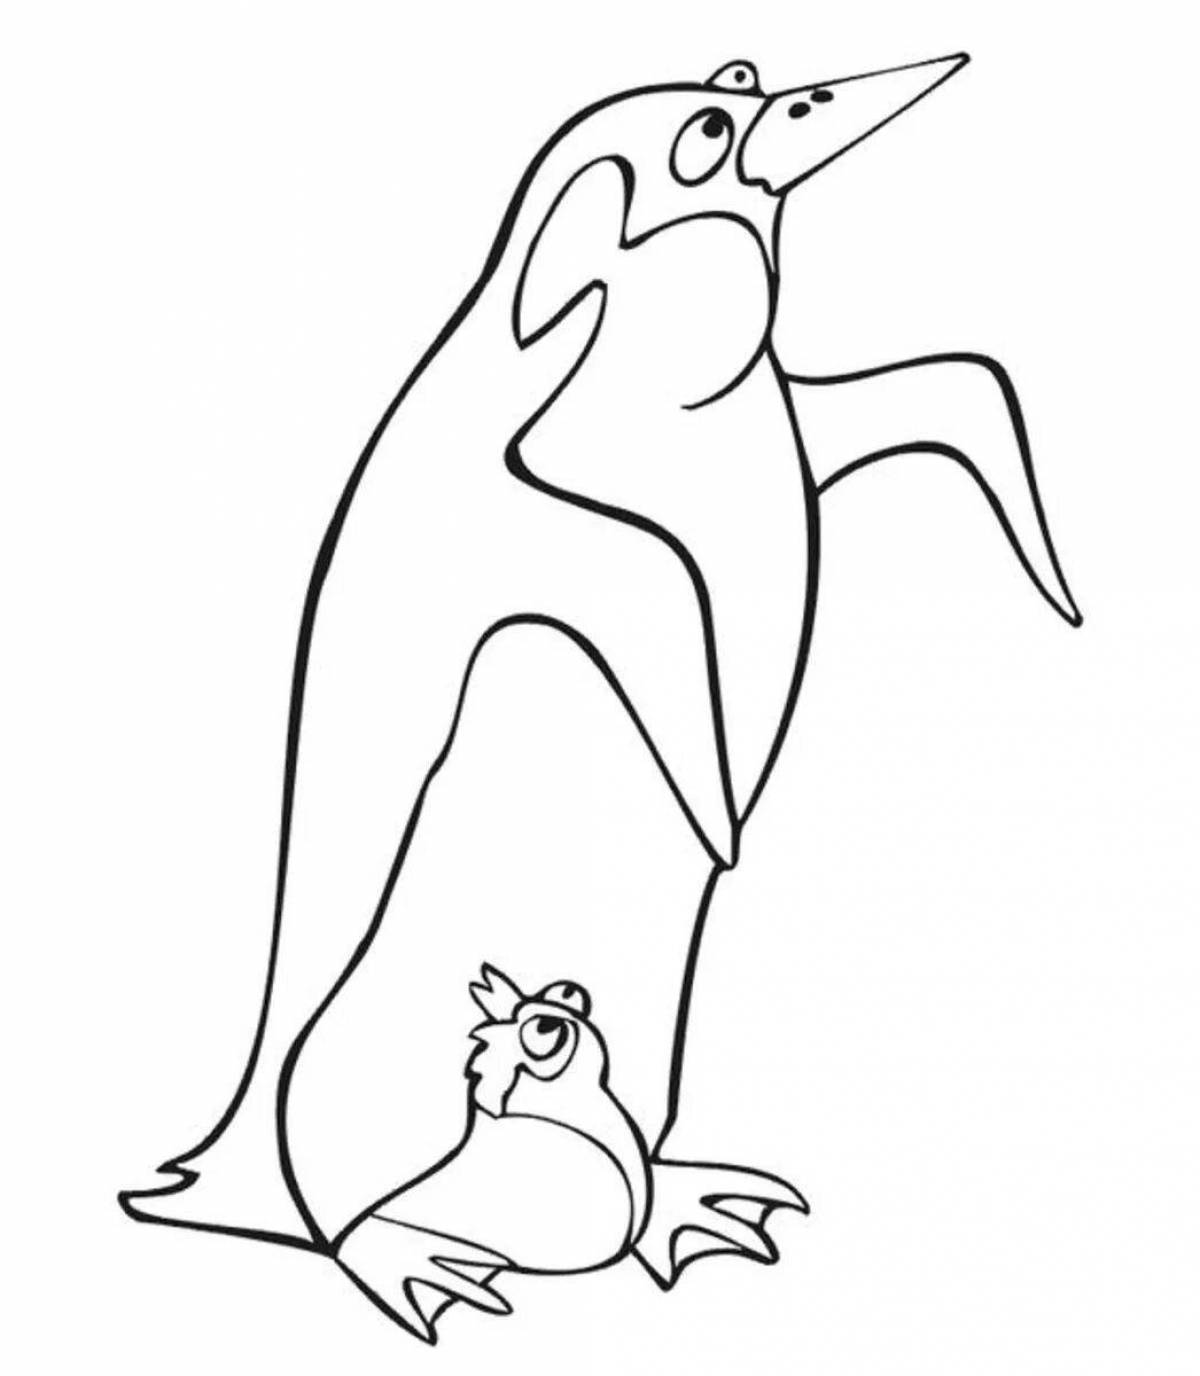 Exciting coloring pages of Antarctica animals for kids